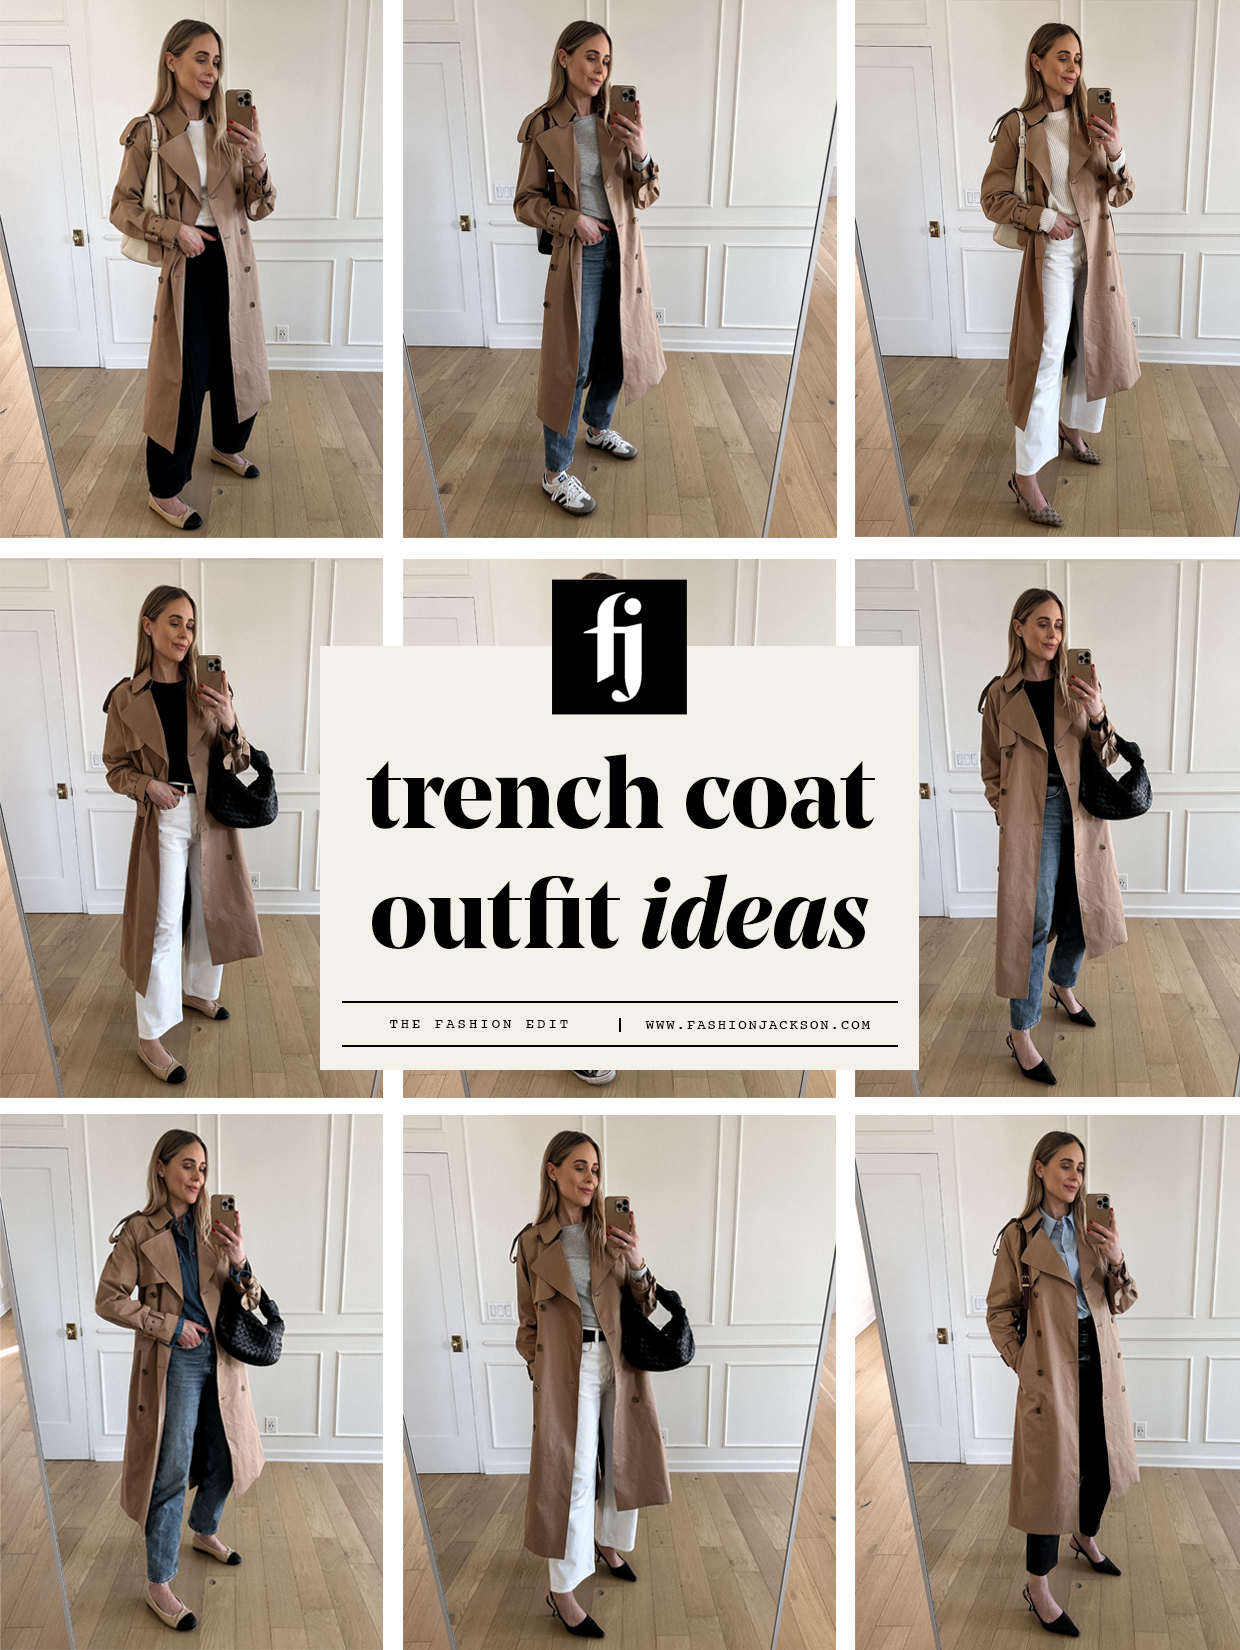 This is Why the Trench Coat is Essential for Spring - Fashion Jackson